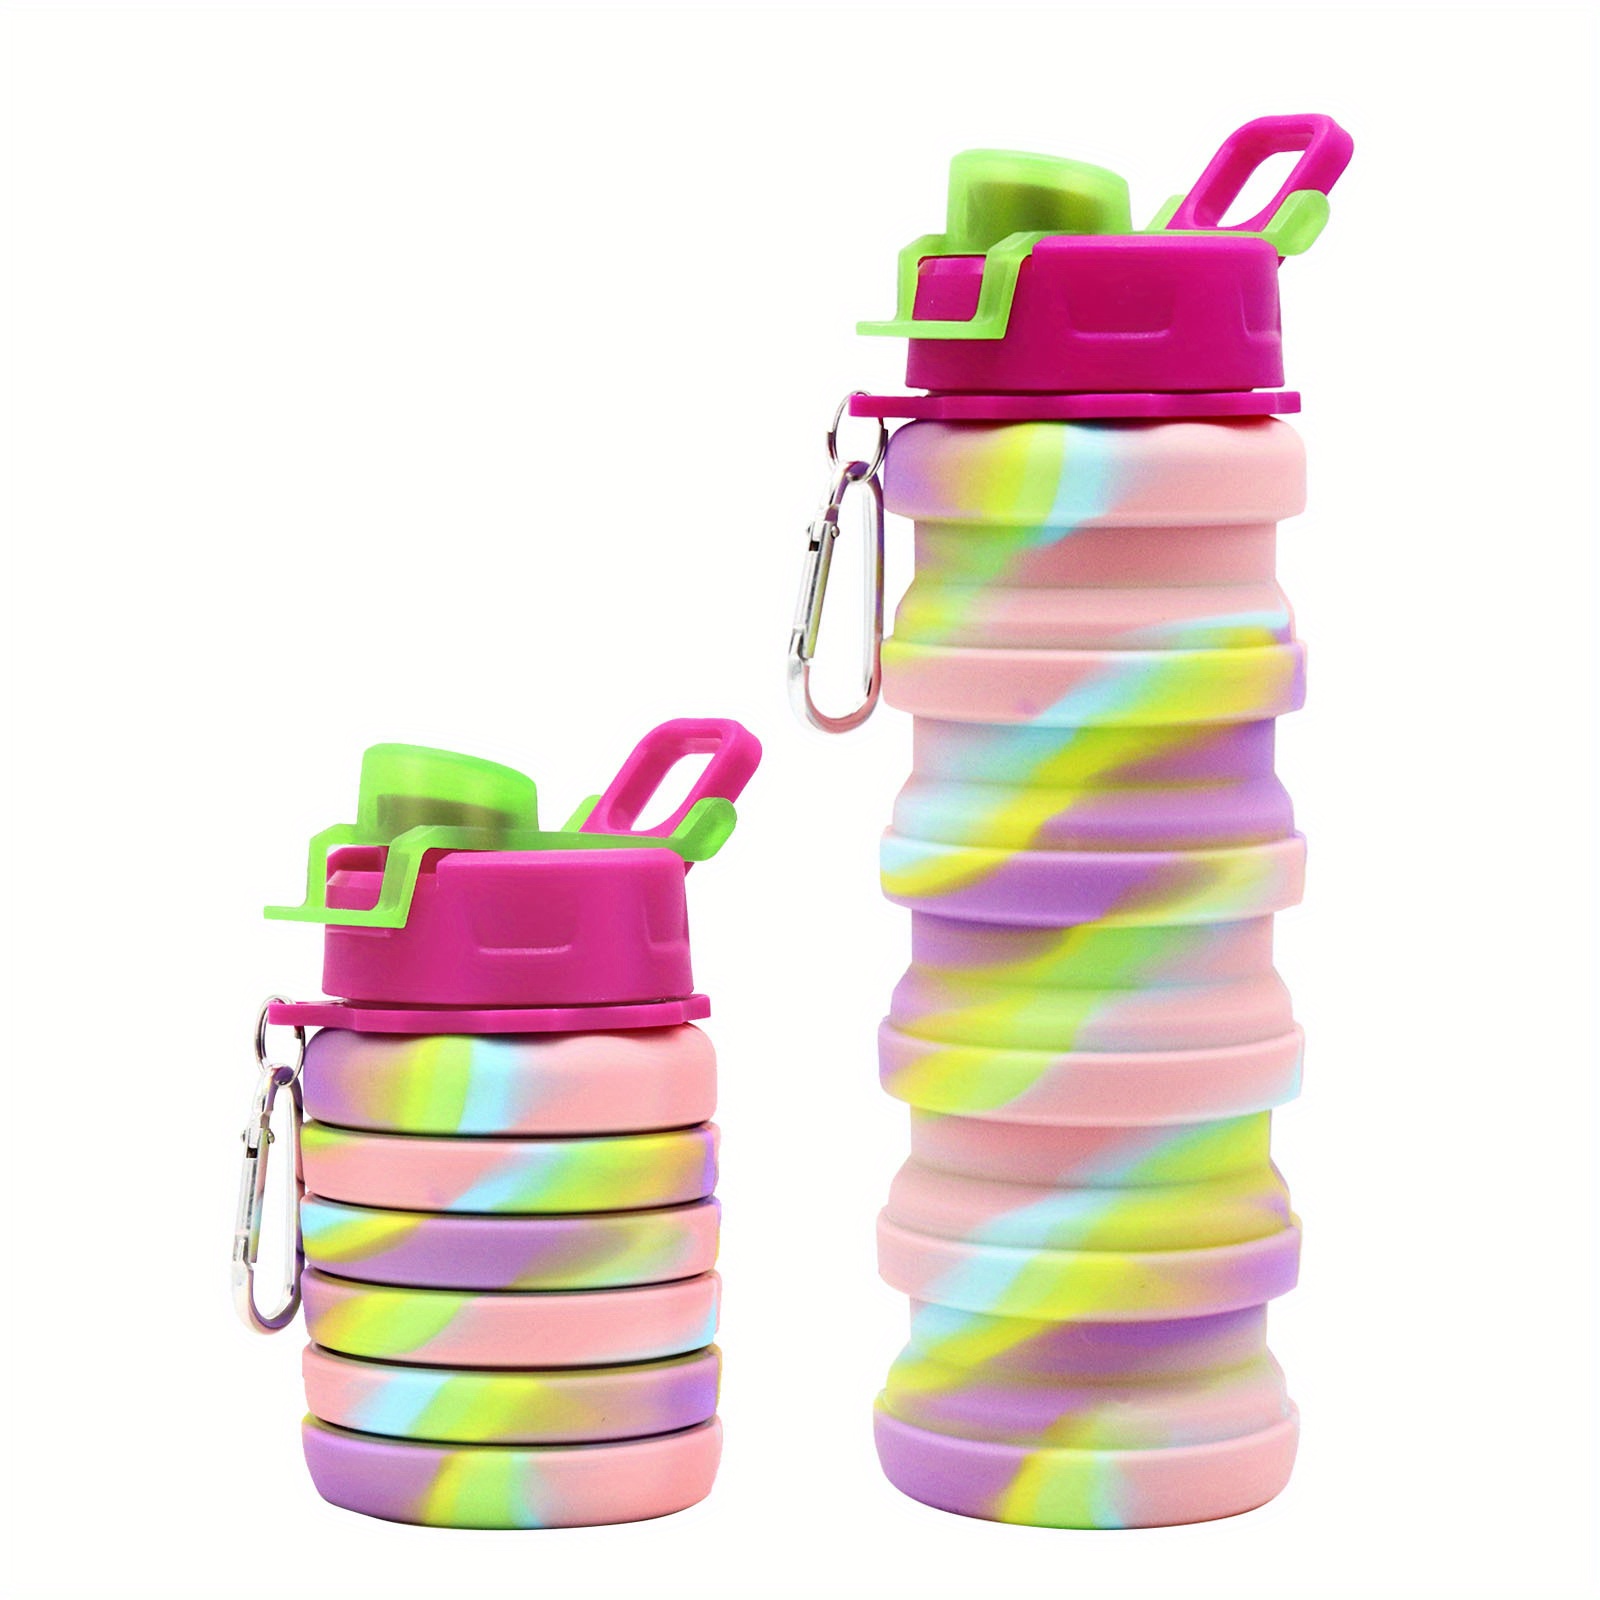 Silicone Collapsible Water Bottles, Kids Water Bottle, Pop Its Water Bottle for Toddlers, Camping Cup with Carabiner, BPA Free and Leakproof, Travel